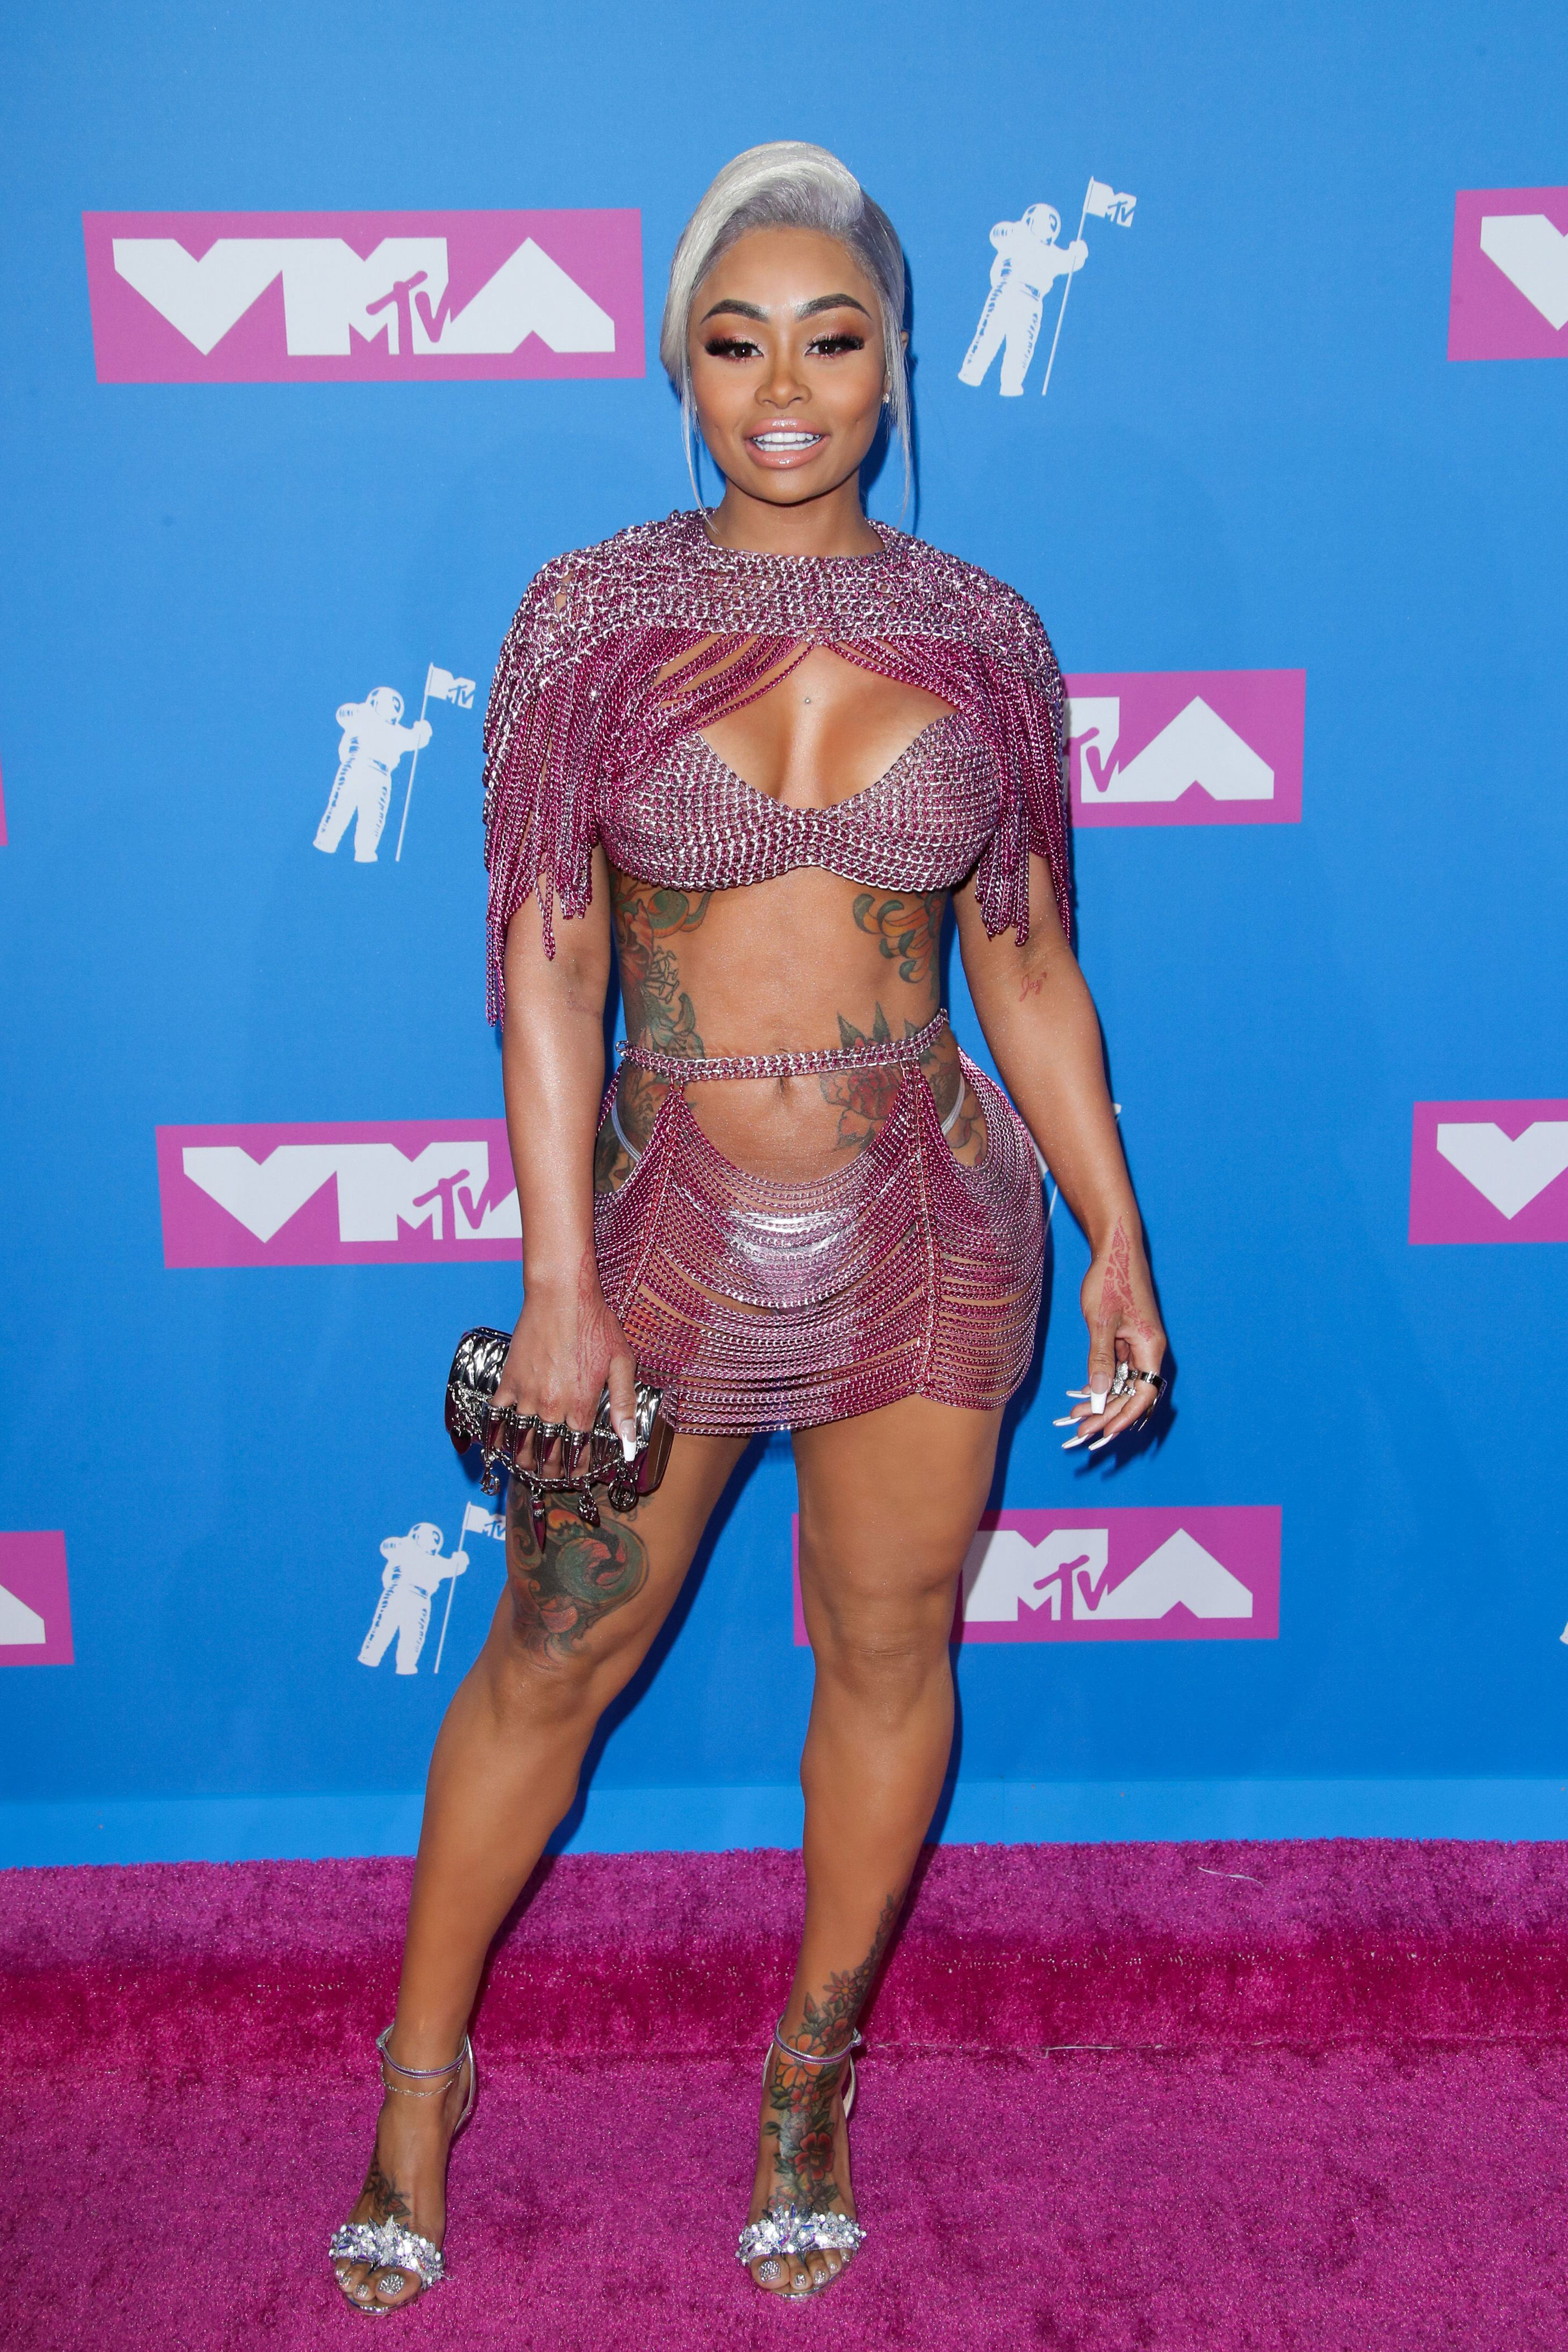 <p>In May 2019, Blac Chyna revealed to talk-show host Wendy Williams that she's gone under the knife multiple times. "I've had lipo before, I've had my breasts done four times," she said, explaining that her breast augmentations have made her chest bigger as well as smaller. (At one point, she said, "I was like, 'This is just too much.'") Chyna, who's also famous for her curvaceous derriere, told Wendy that she had liposuction to reduce her bottom after she gave birth to her second child, Dream Kardashian, in 2016. "I went and got something done. I got lipo because after I had Dream, it was like, out of control. So I had some of it taken out," Chyna (pictured in 2018) explained.</p>